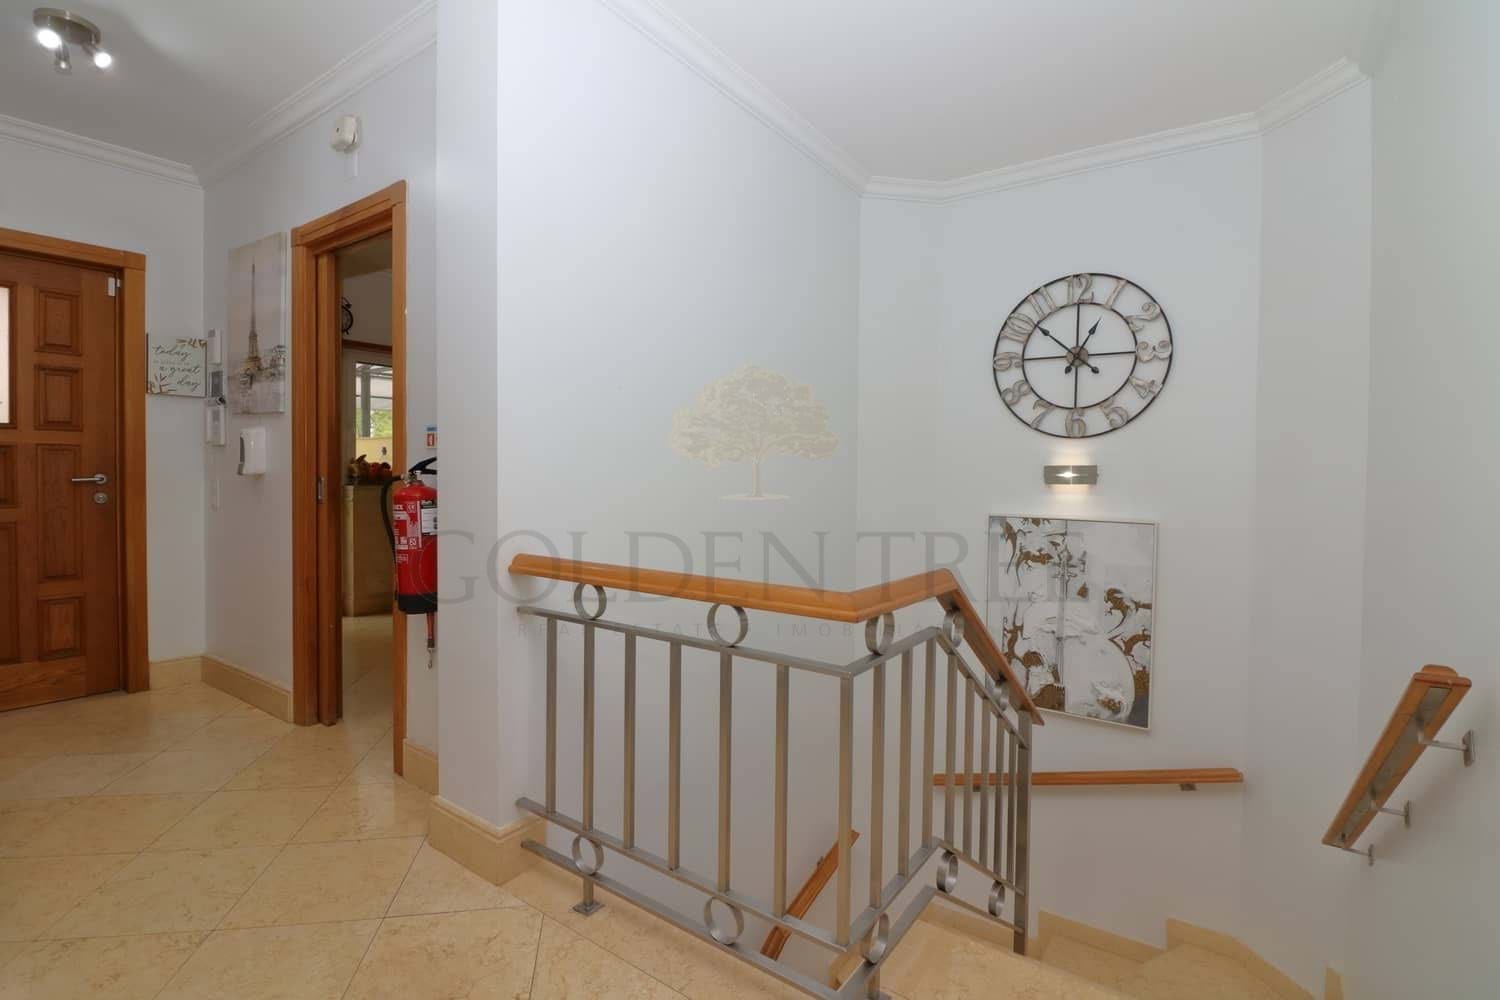 property gallery image